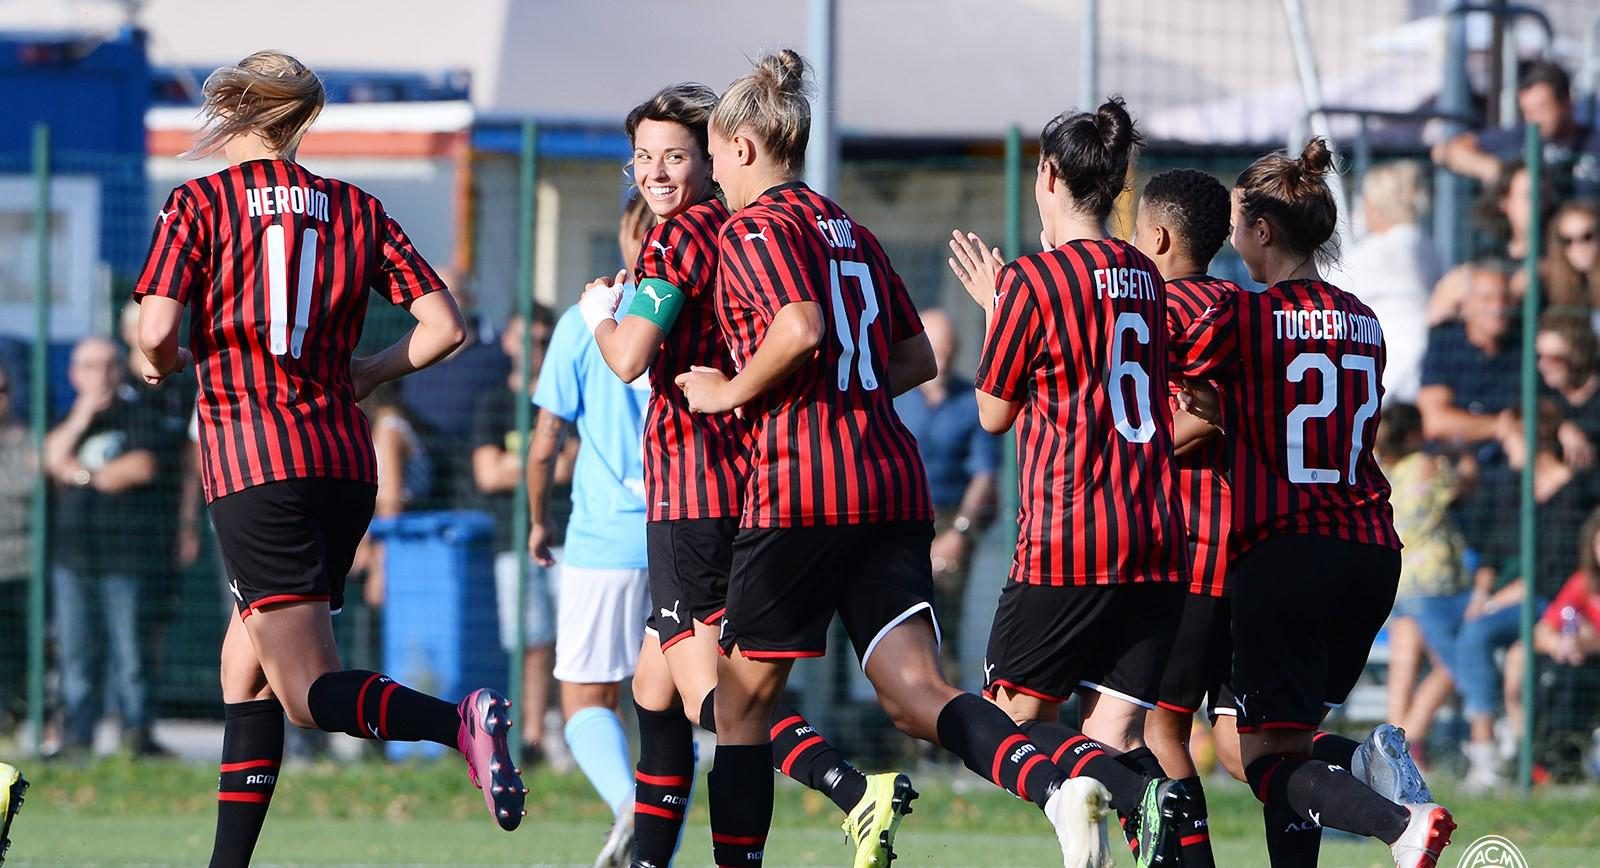 Napoli collected yet another defeat in Serie A Femminile at the hands of Milan who, however, had to sweat a lot to bring home the three points on offer